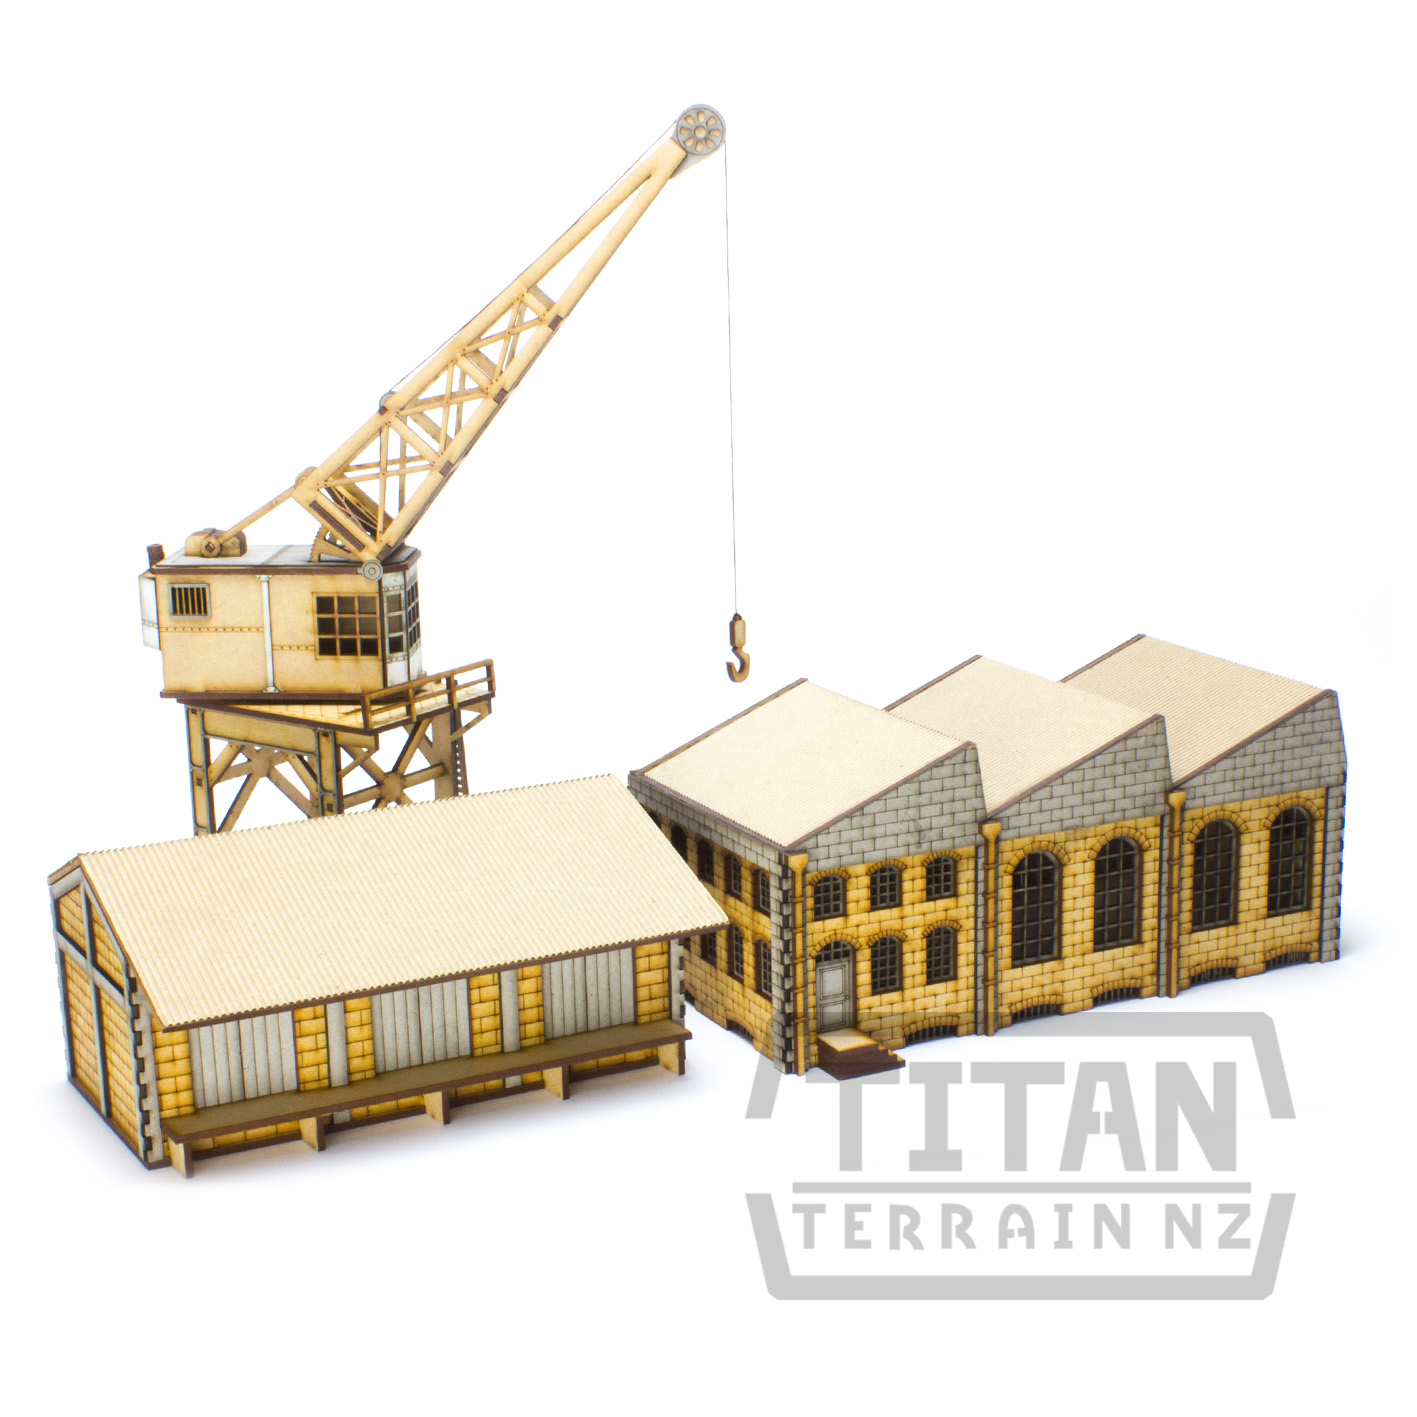 New dockside warehouses and a luffing crane from Titan Terrain NZ